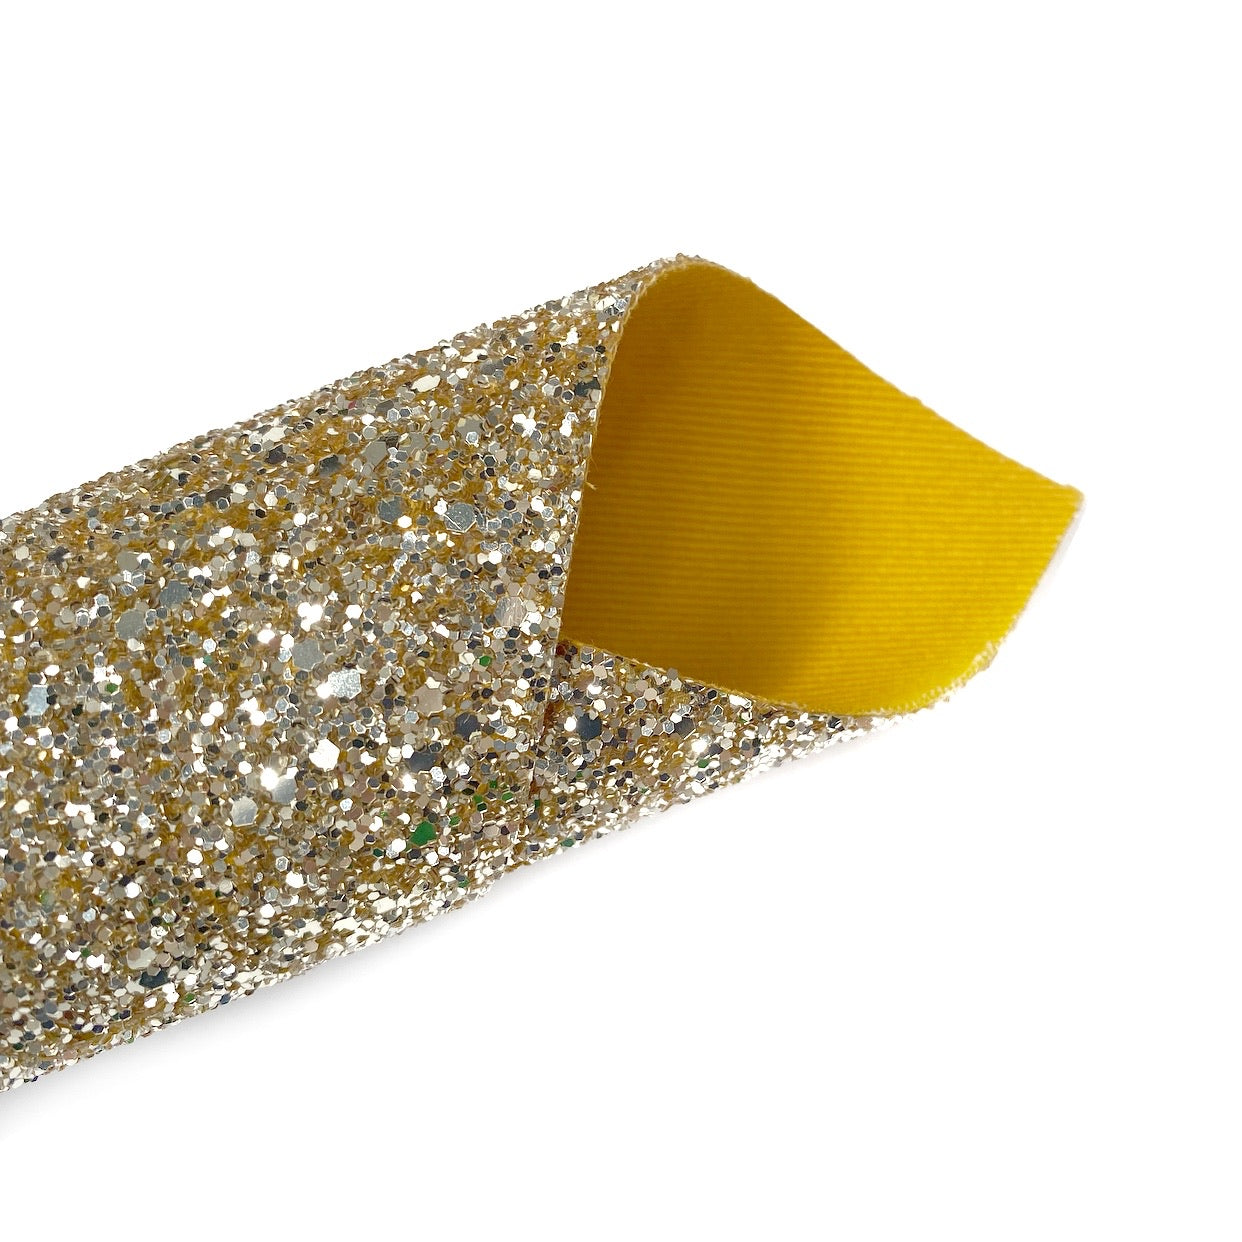 Golden Oldie Lux Premium Chunky Glitter Fabric